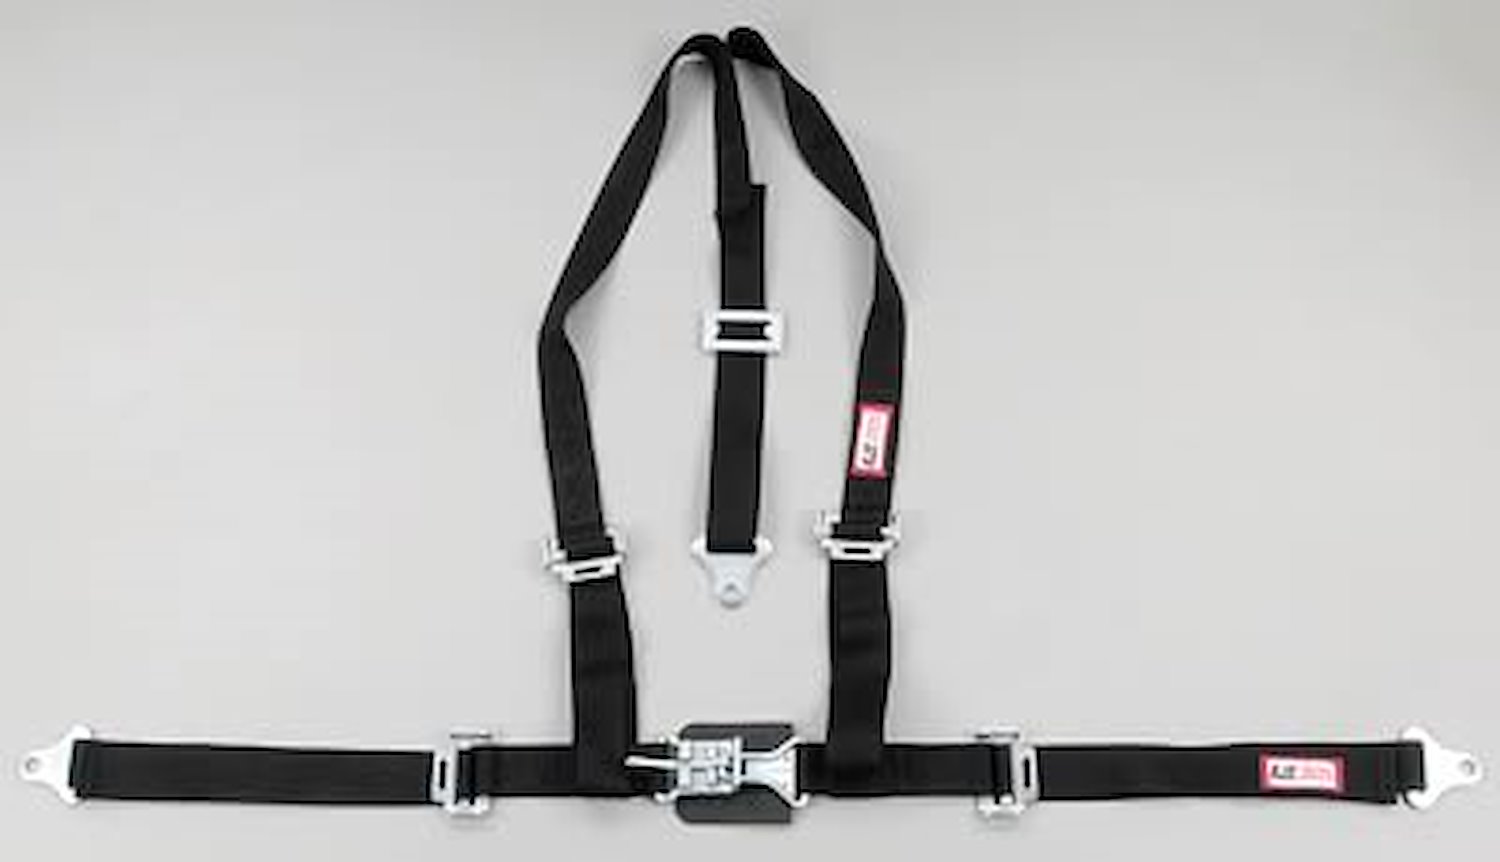 NON-SFI L&L HARNESS 2 PULL UP Lap Belt SNAP SEWN IN 2 S.H. INDIVIDUAL FLOOR Mount WRAP/BOLT BLUE